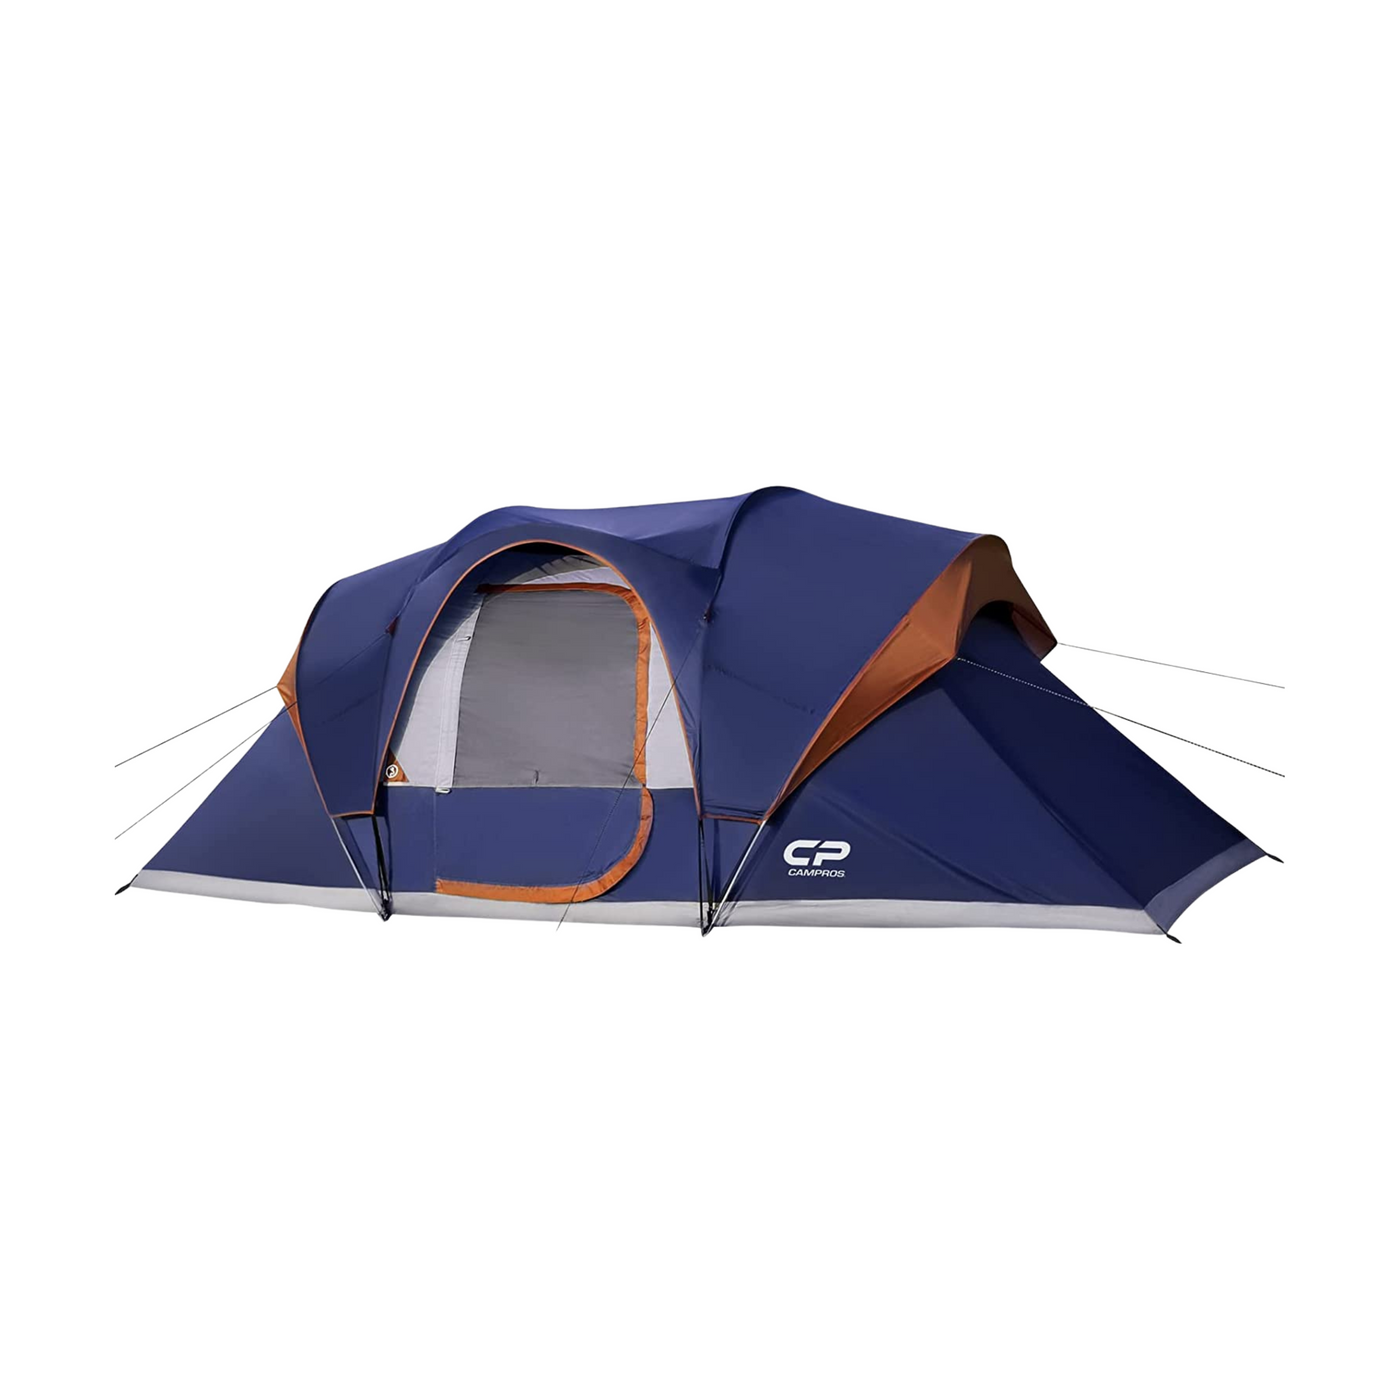 CAMPROS Family Camping 9 Person Tent (2 Rooms)